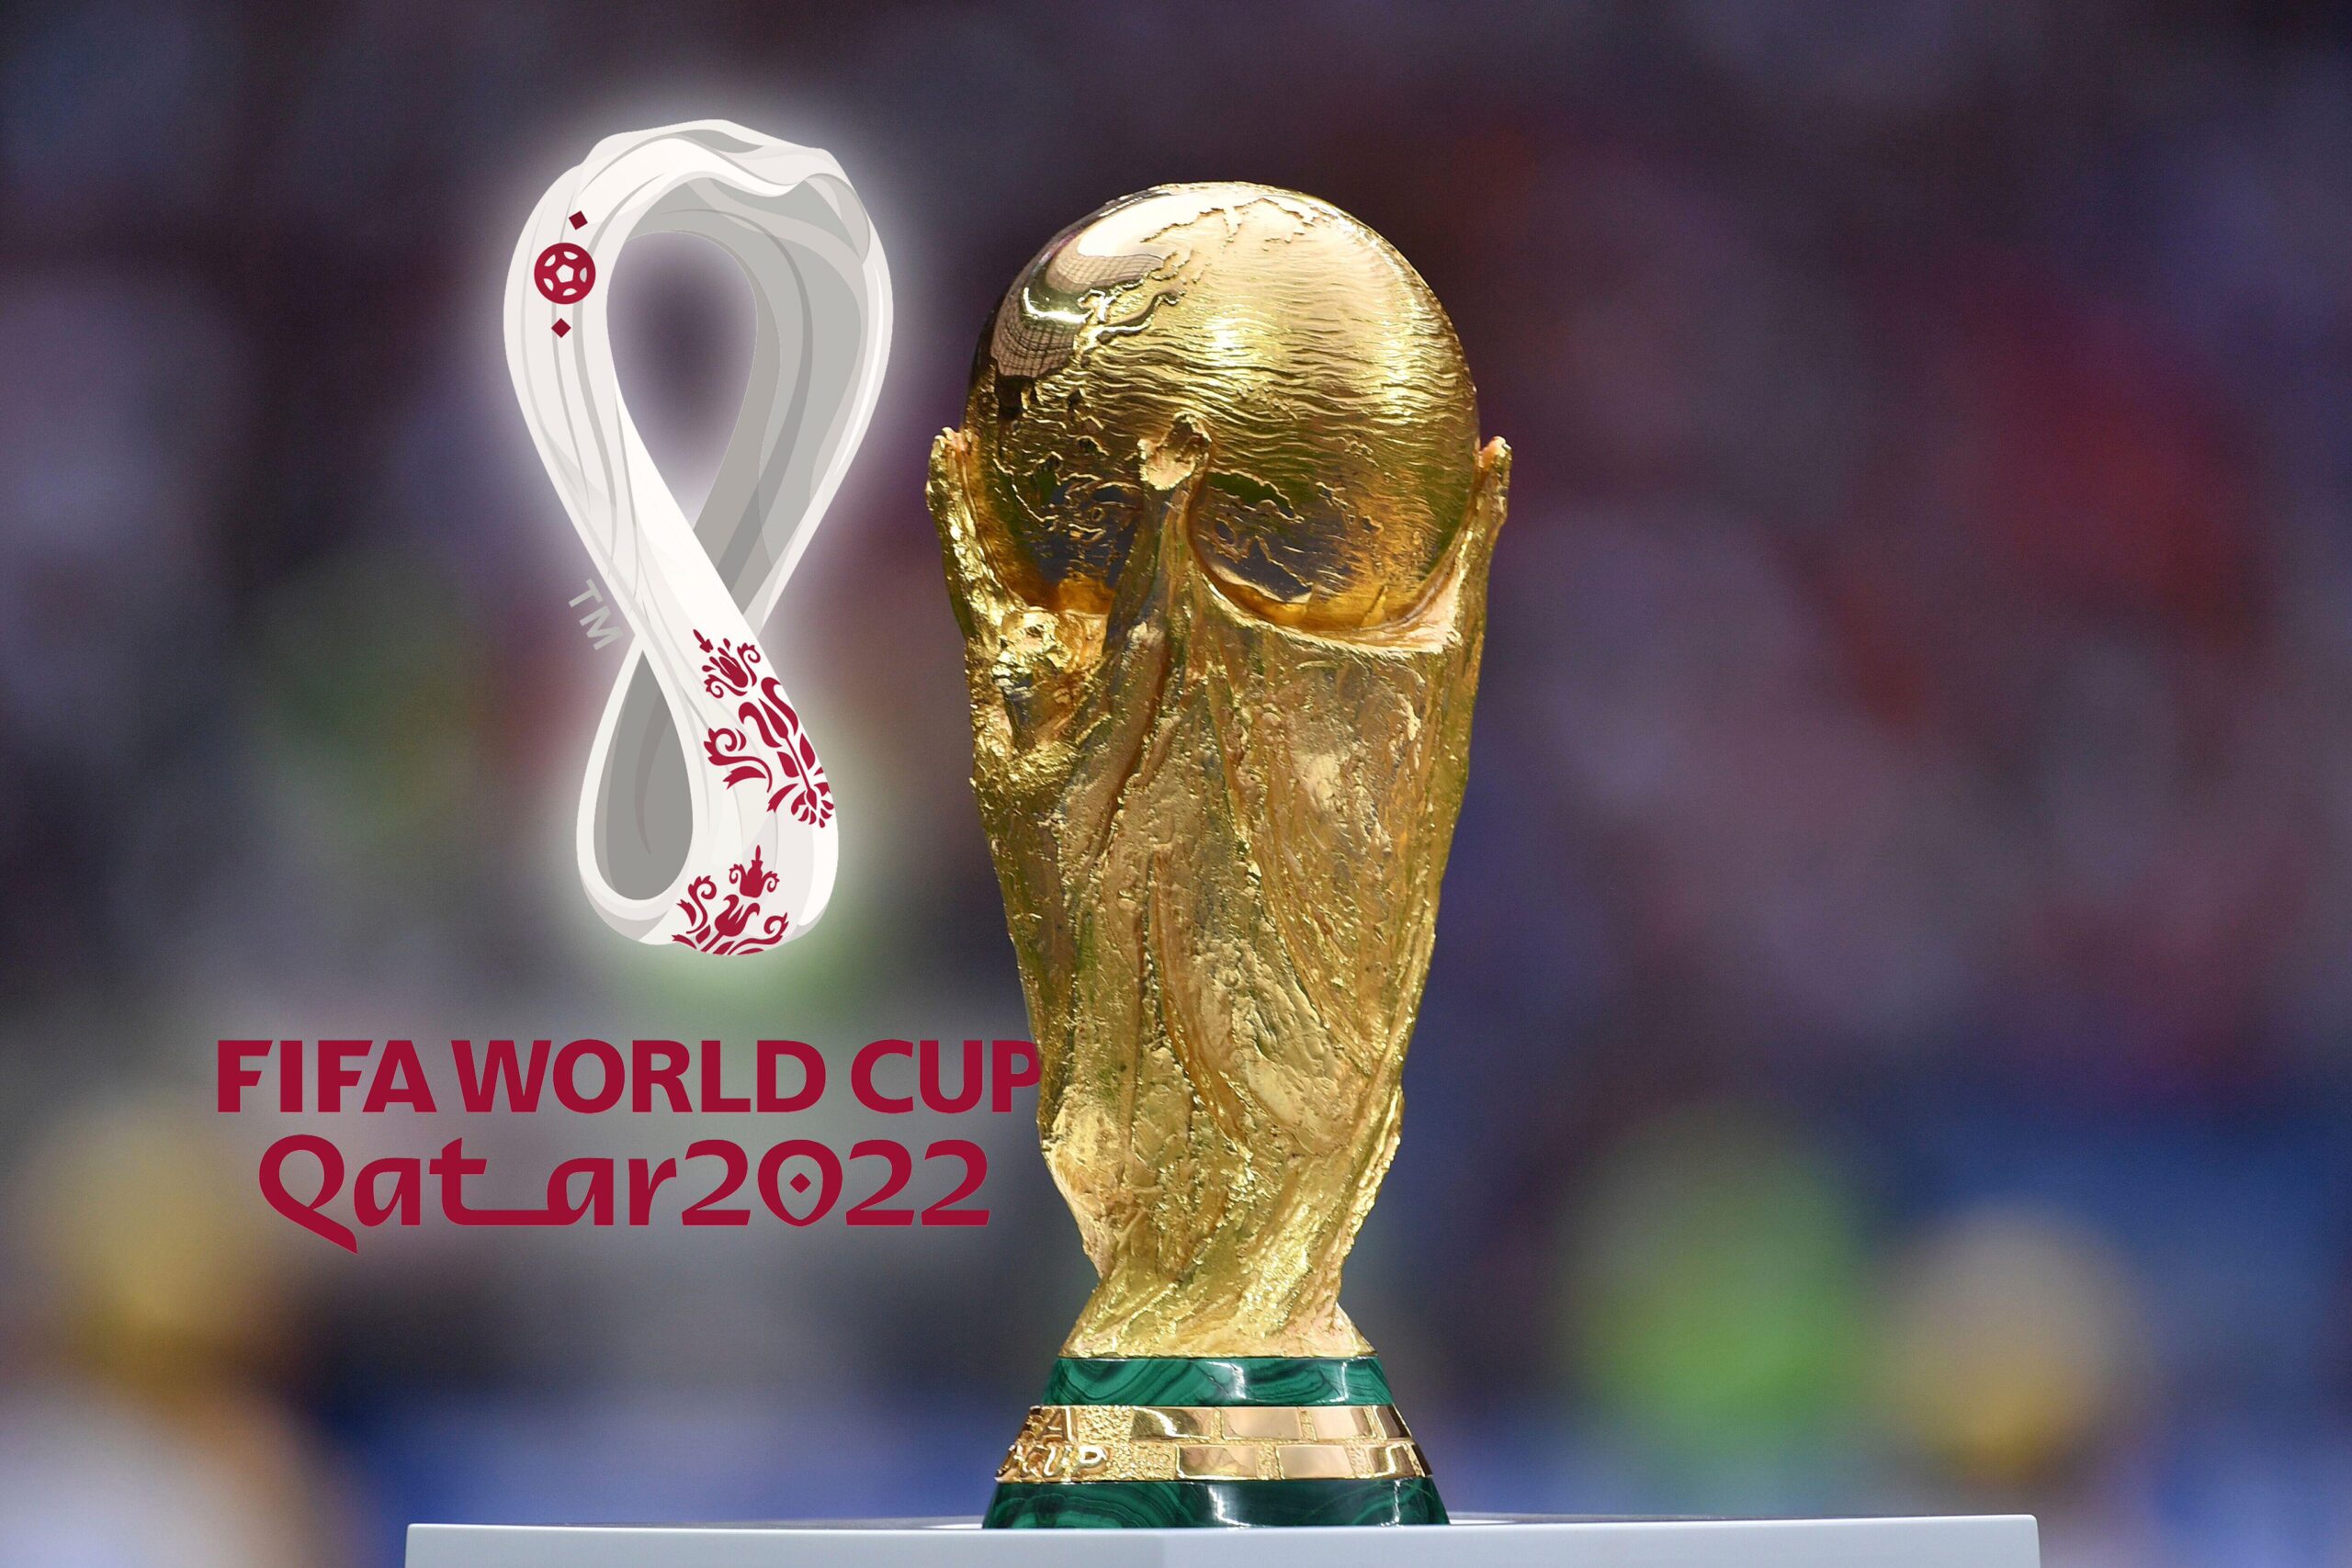 FIFA CONFIRMS CHANGE TO WORLD CUP START DATE Africa Equity Media